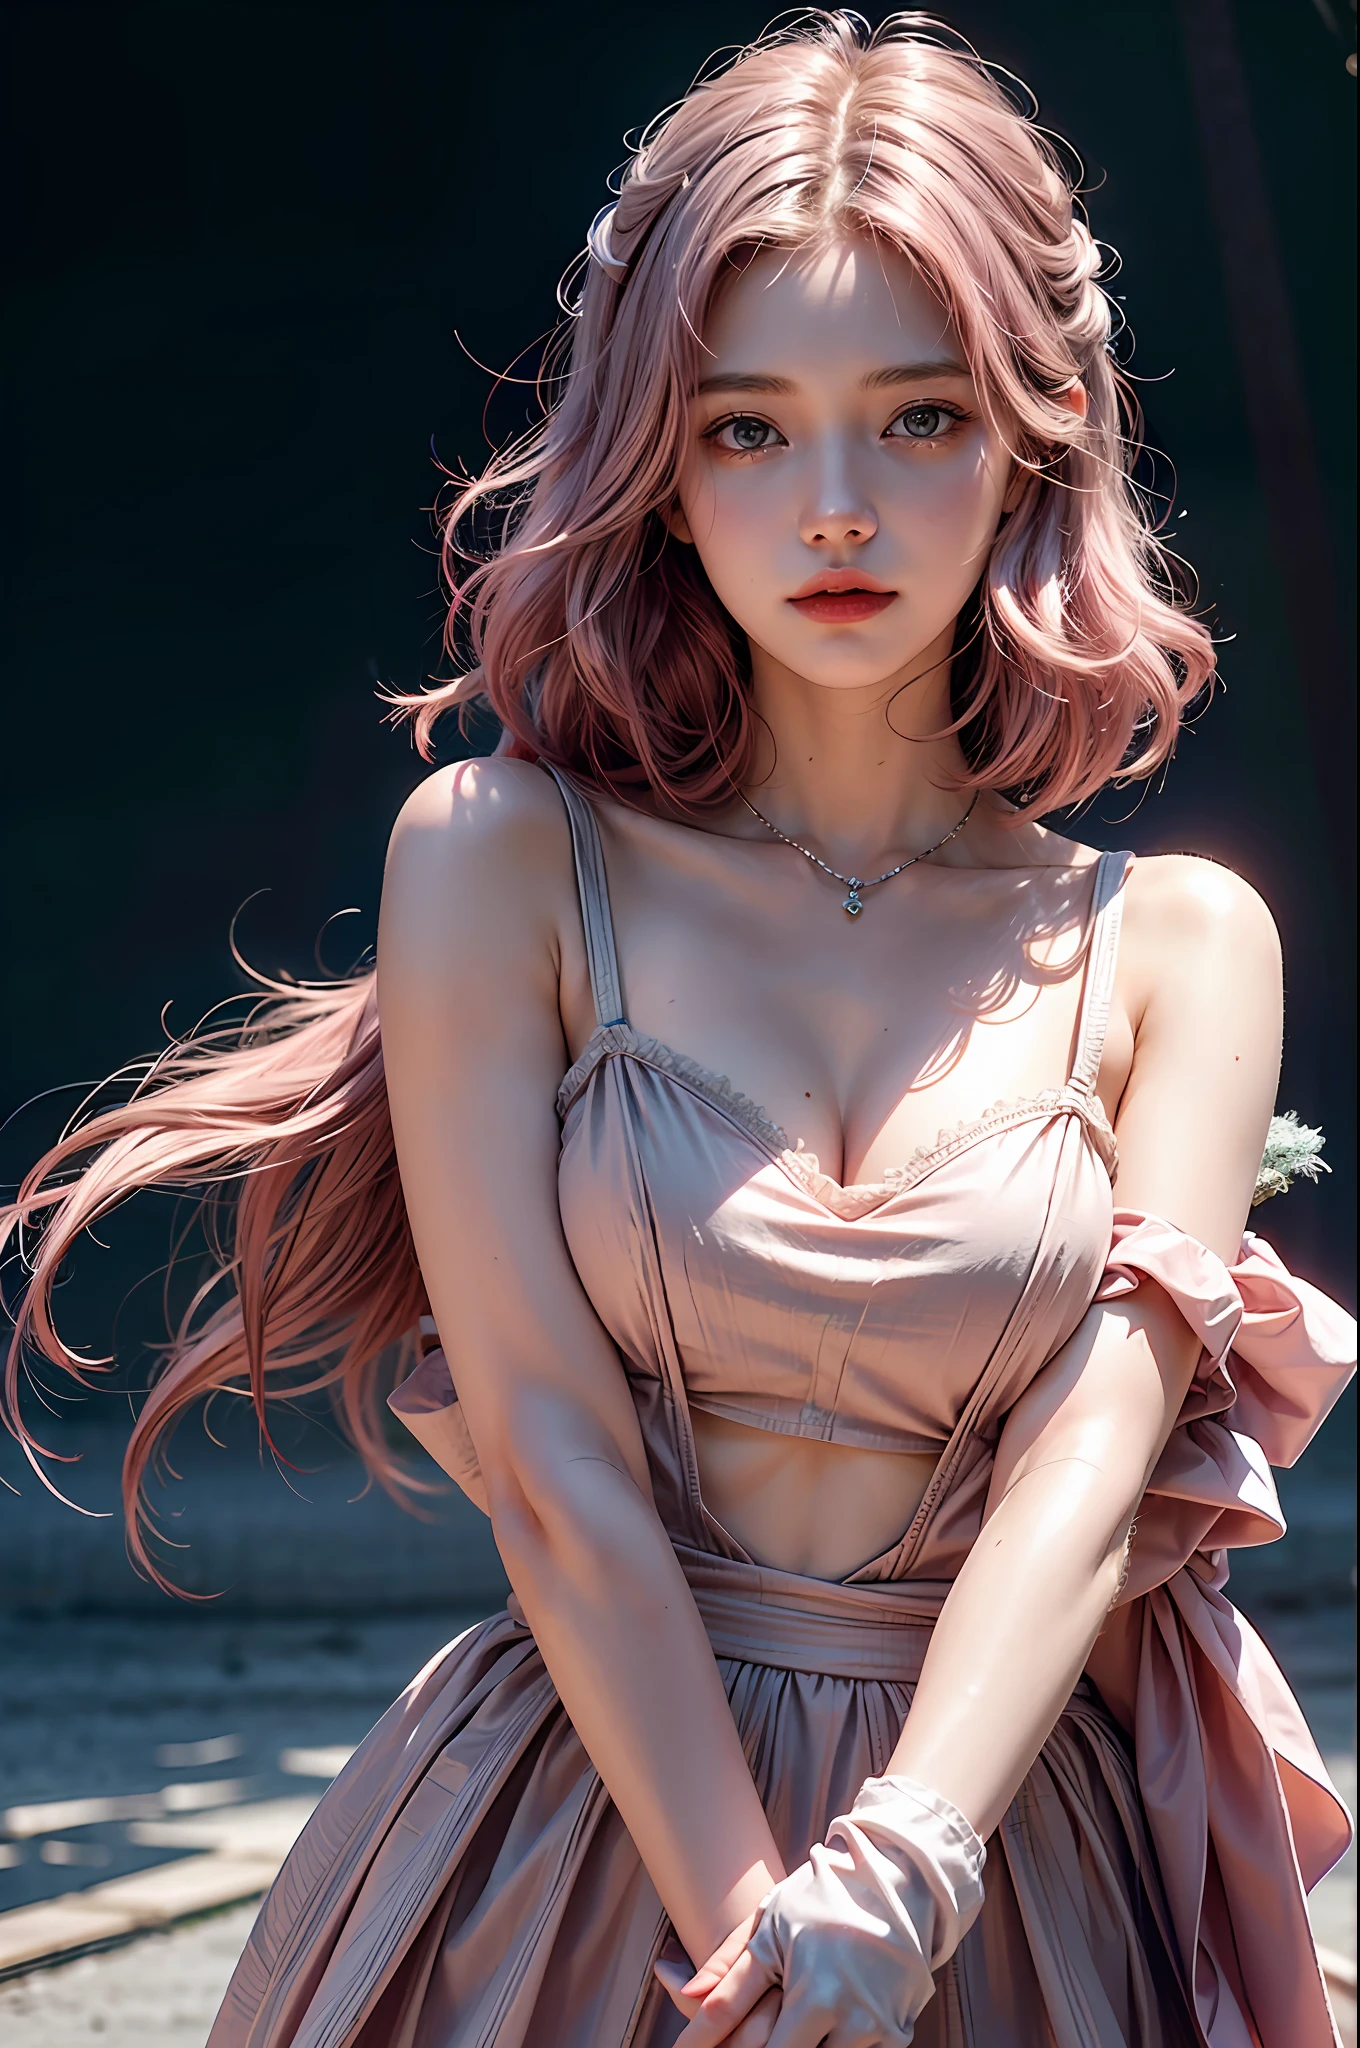 (masterpiece,realistic, best quality:1.4), excited girl, 1girl, she is pointing out a person to the right hand side, wavy medium pink hair, floating hair by wind blow, solo, slender, slim waist,white gloves, gloves, white teeth smile, looking at someone, pink hair, short hair,jewelry, detailed face and eyes, delicate and beautiful face,upon_body, tyndall effect,photorealistic, dark studio, rim lighting, two tone lighting,(high detailed skin:1.2), 8k uhd, dslr, soft lighting, high quality, volumetric lighting, candid, Photograph, high resolution, 4k, 8k, pokies,Bokeh